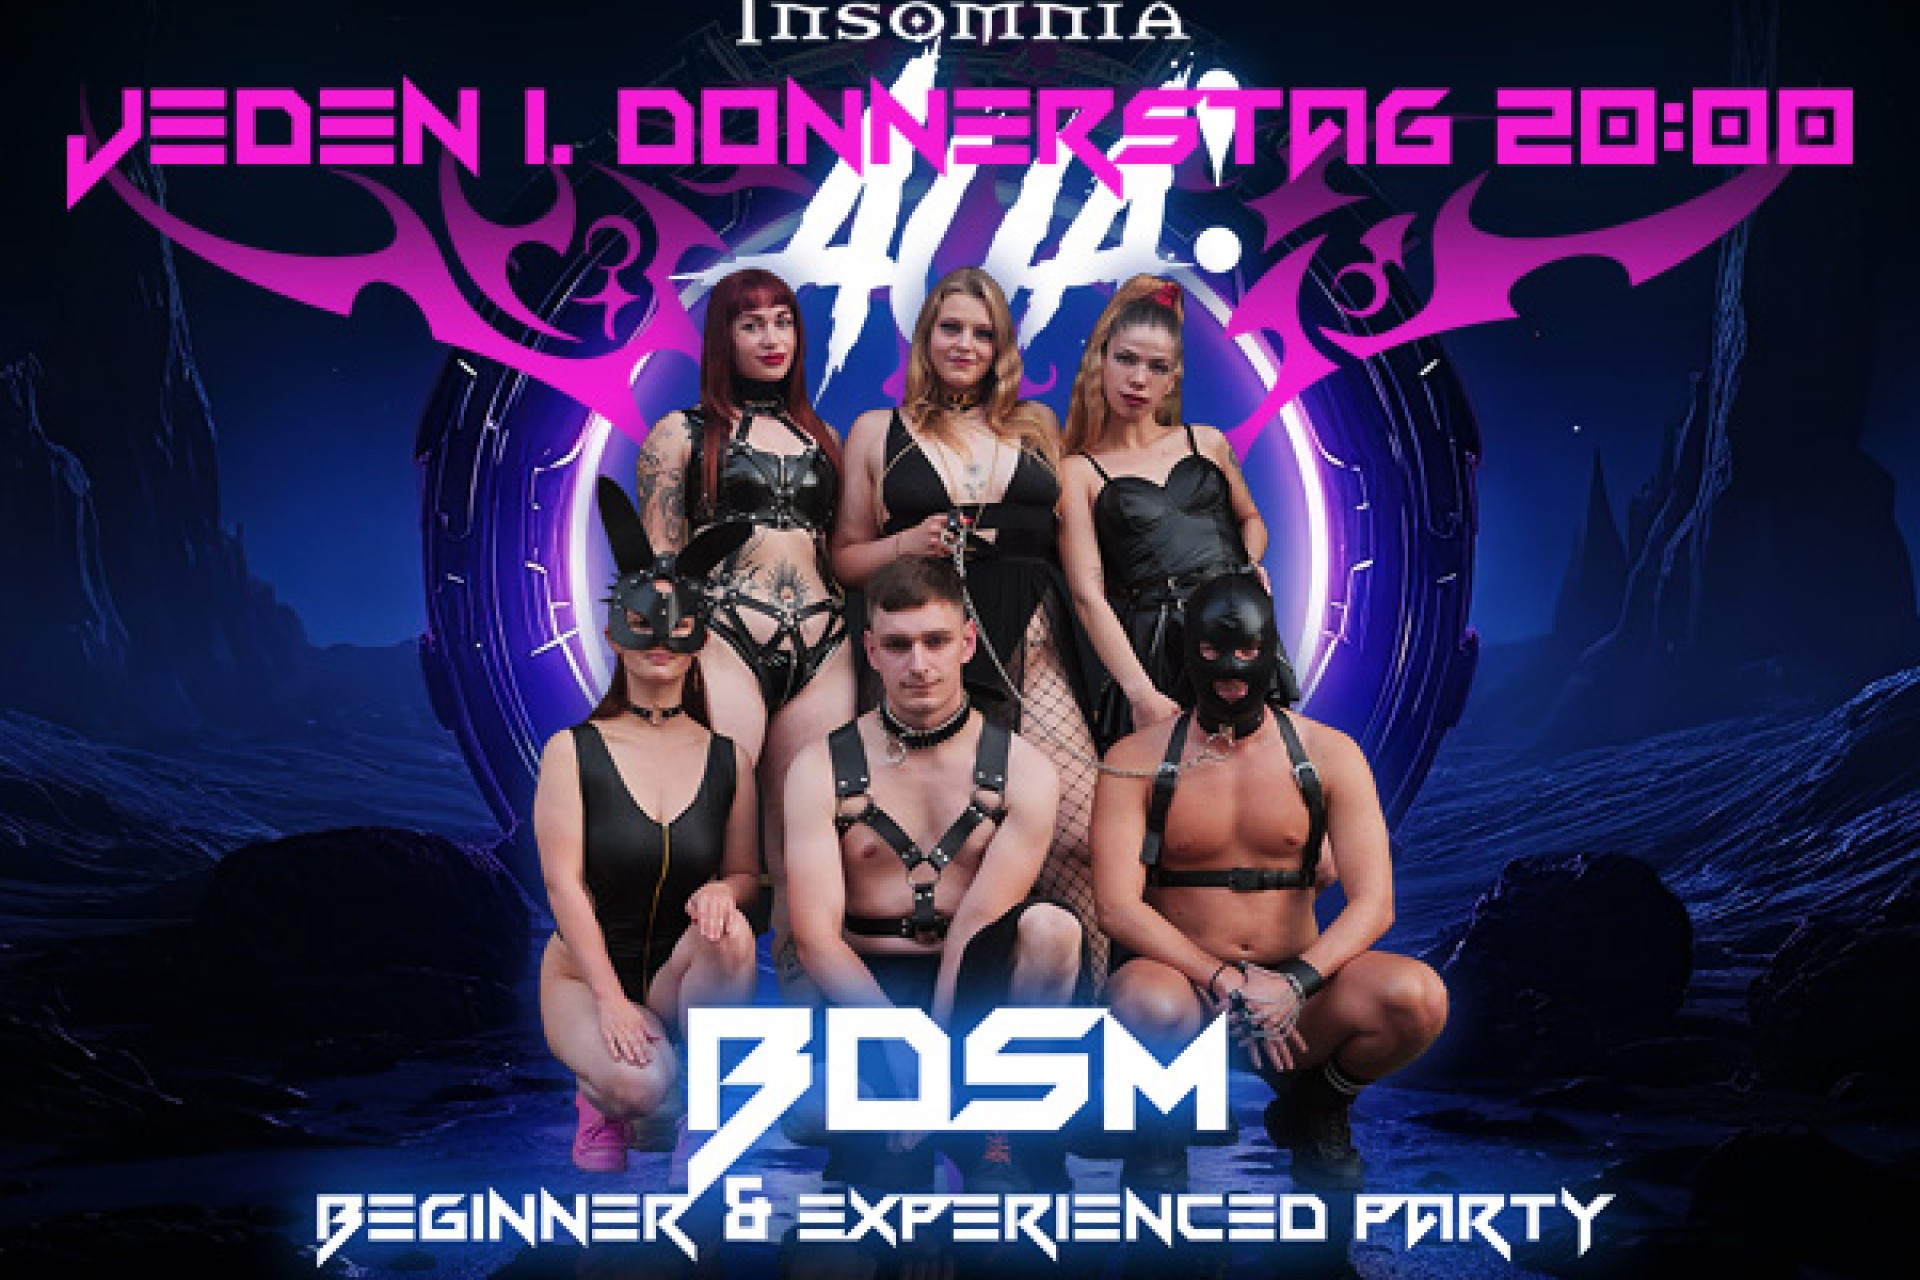 AUA! BDSM party for beginners & advanced players